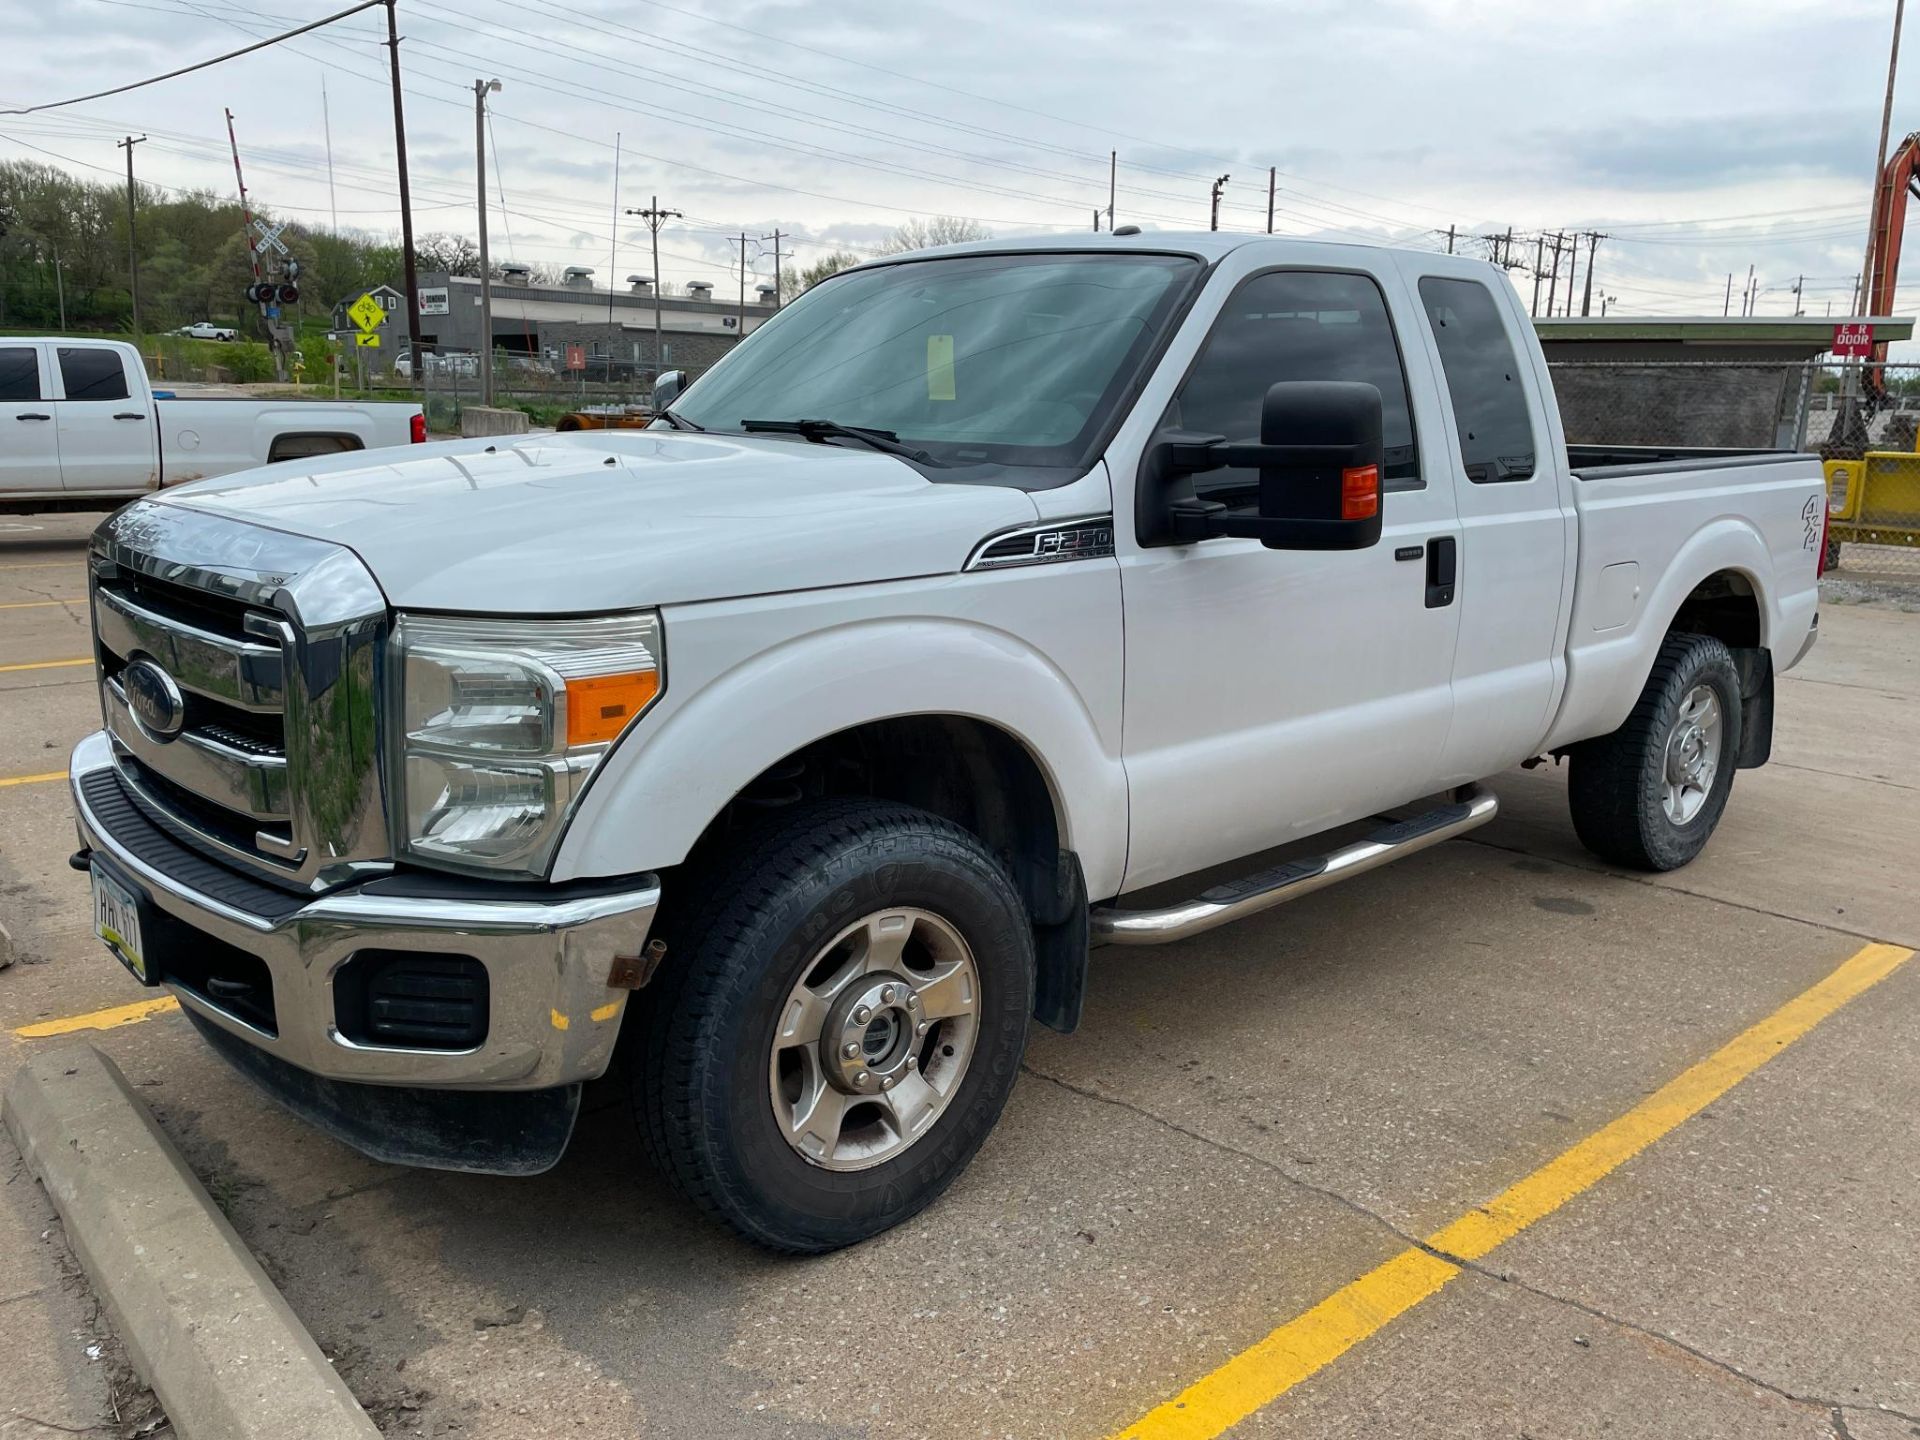 PICKUP TRUCK, 2013 FORD F-250 SUPER DUTY, 4X4, gasoline, extended cab, 123,494 miles, VIN - Image 3 of 15